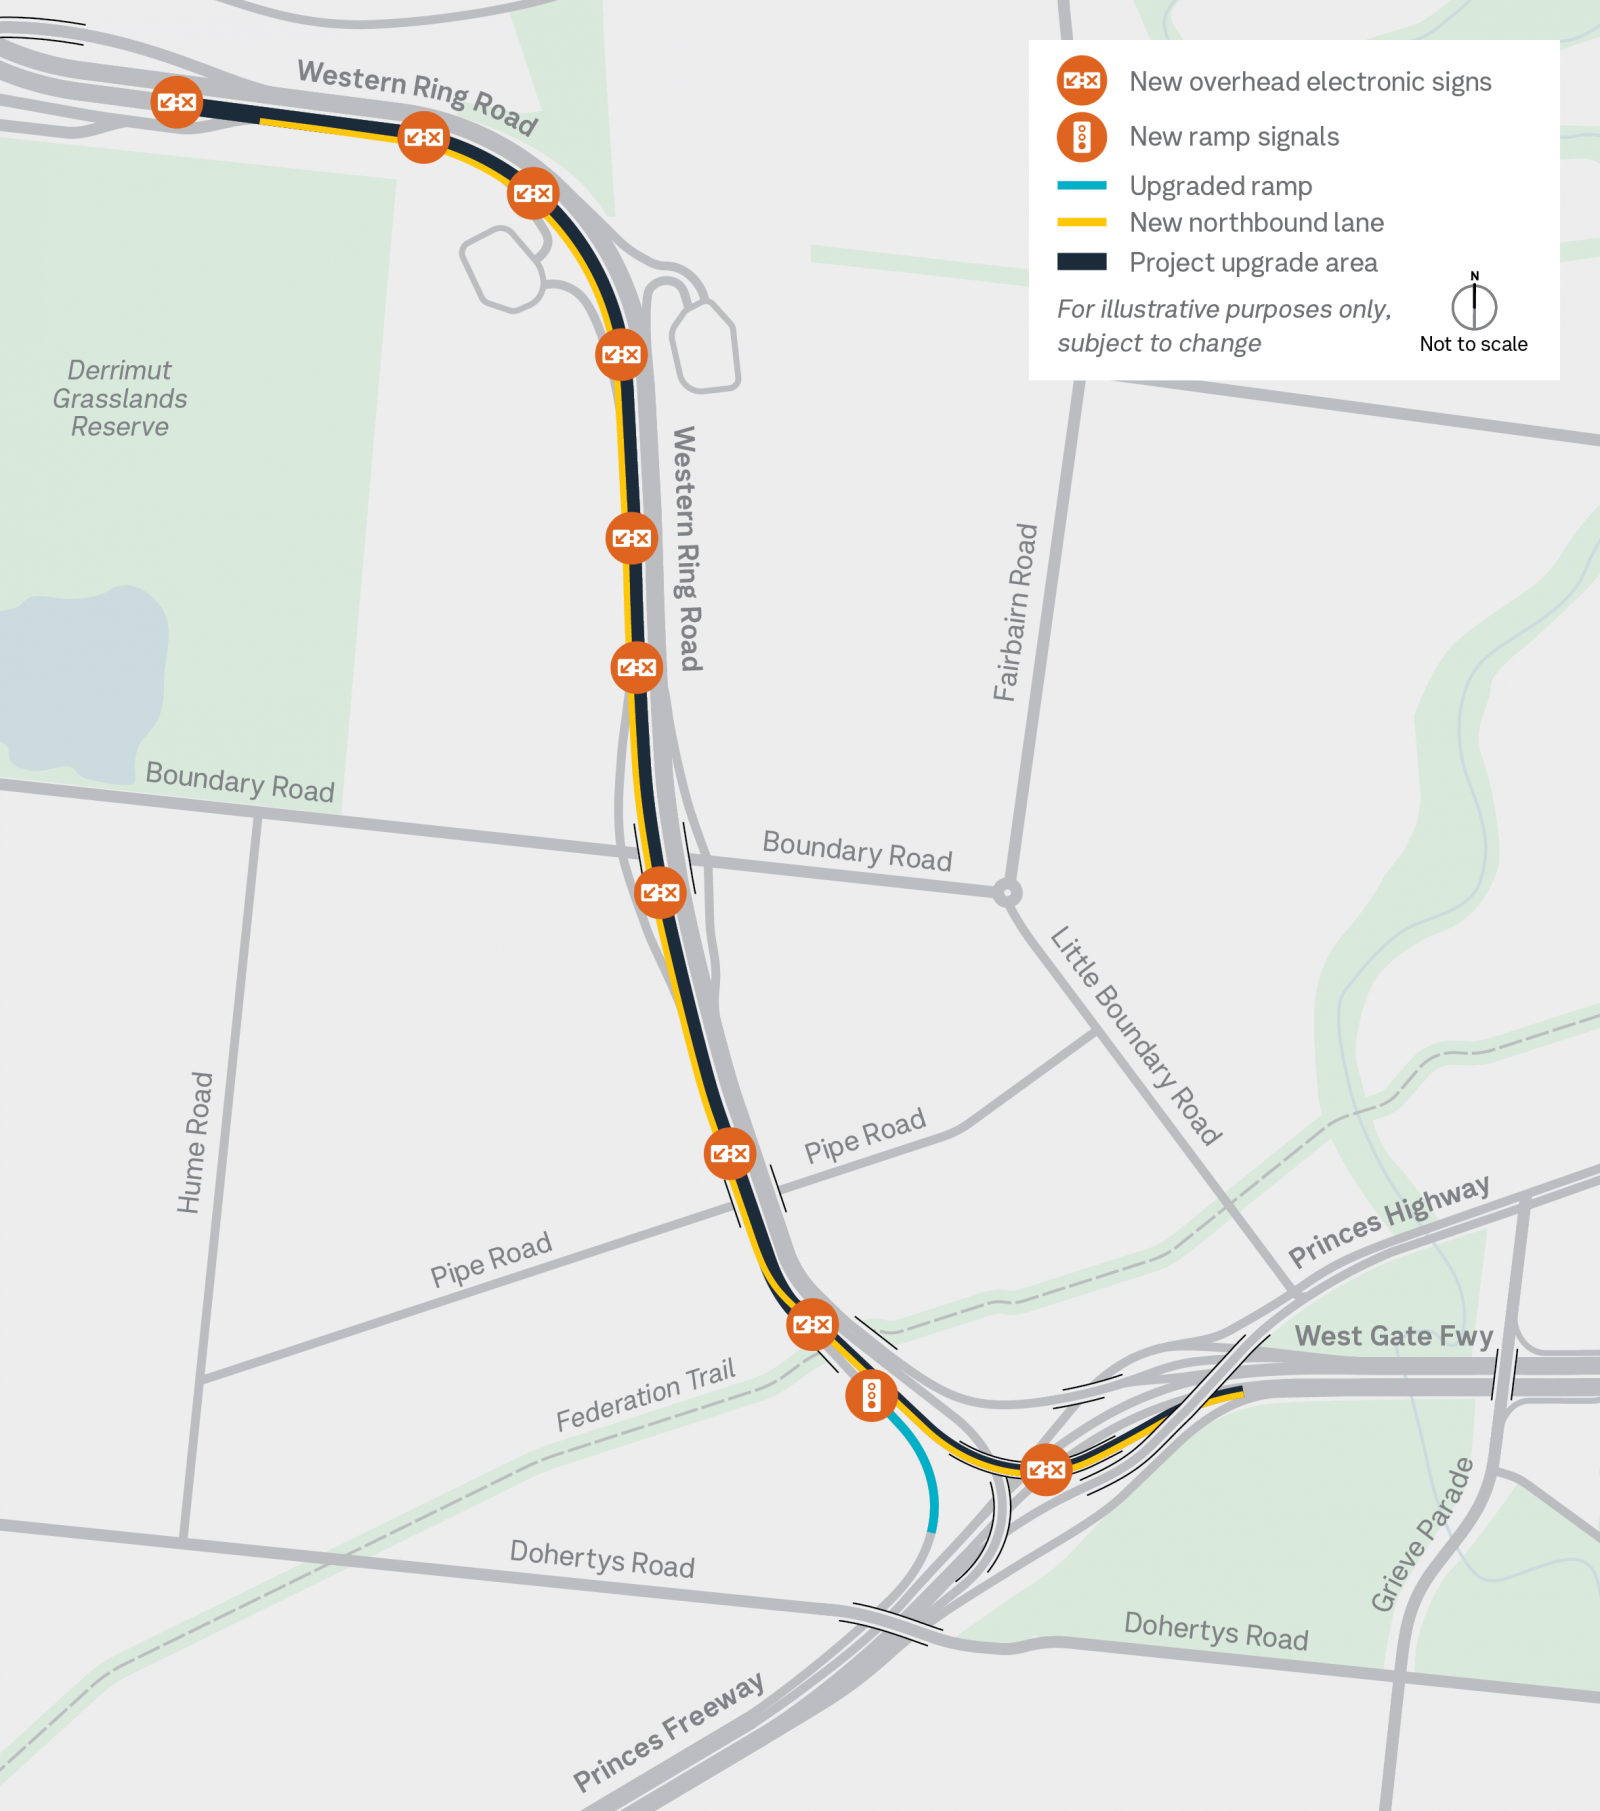 M80 - Fitzgerald Rd to Princess Fwy Project Overview Map